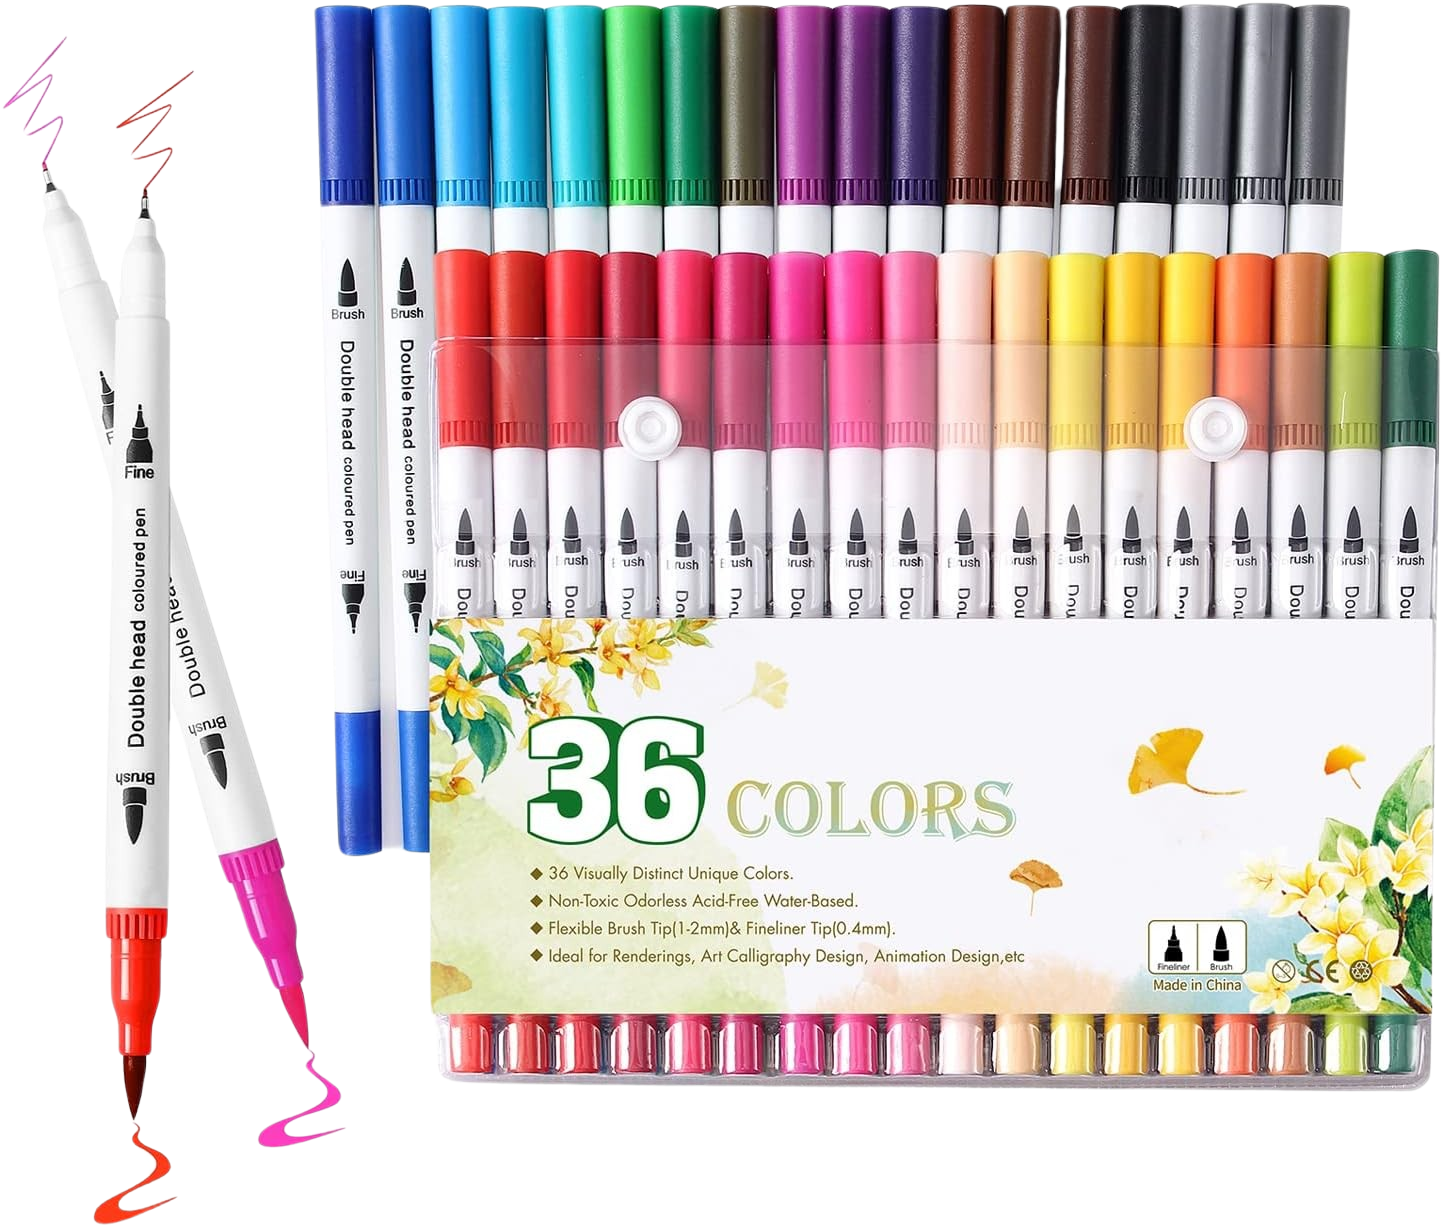 Coloring Pen Gift